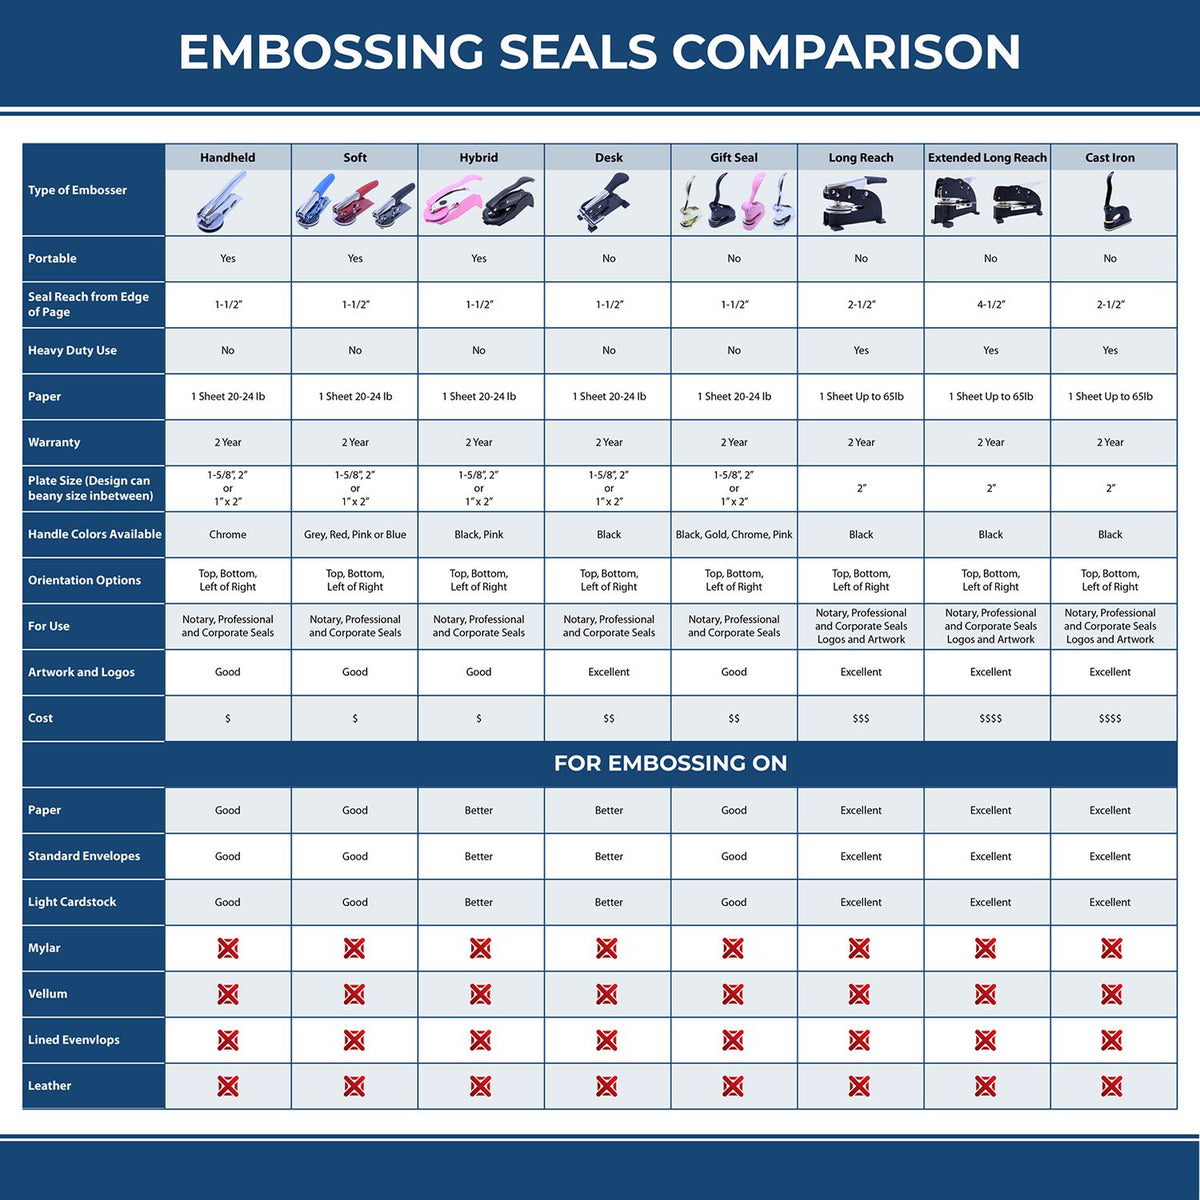 A comparison chart for the different types of mount models available for the Gift Colorado Land Surveyor Seal